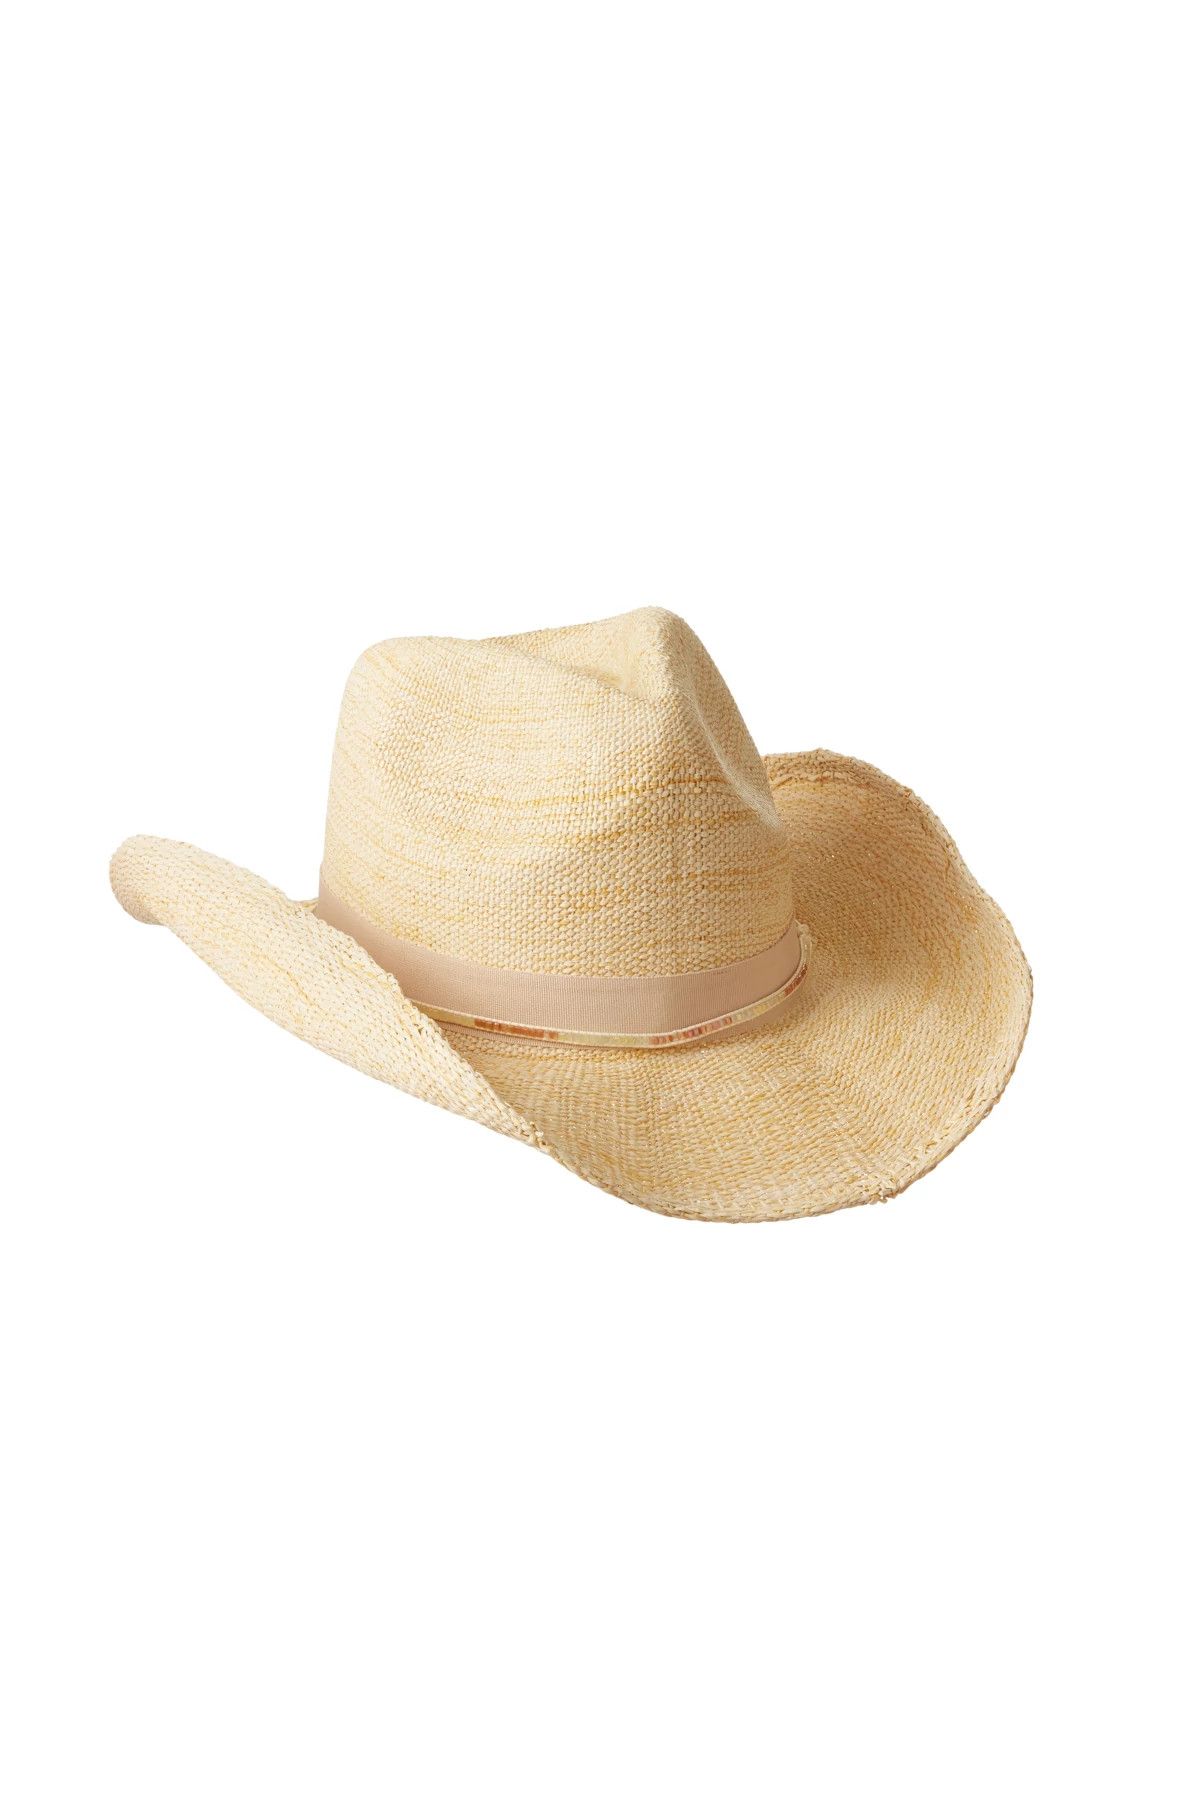 Shimmer Cowboy Hat | Everything But Water